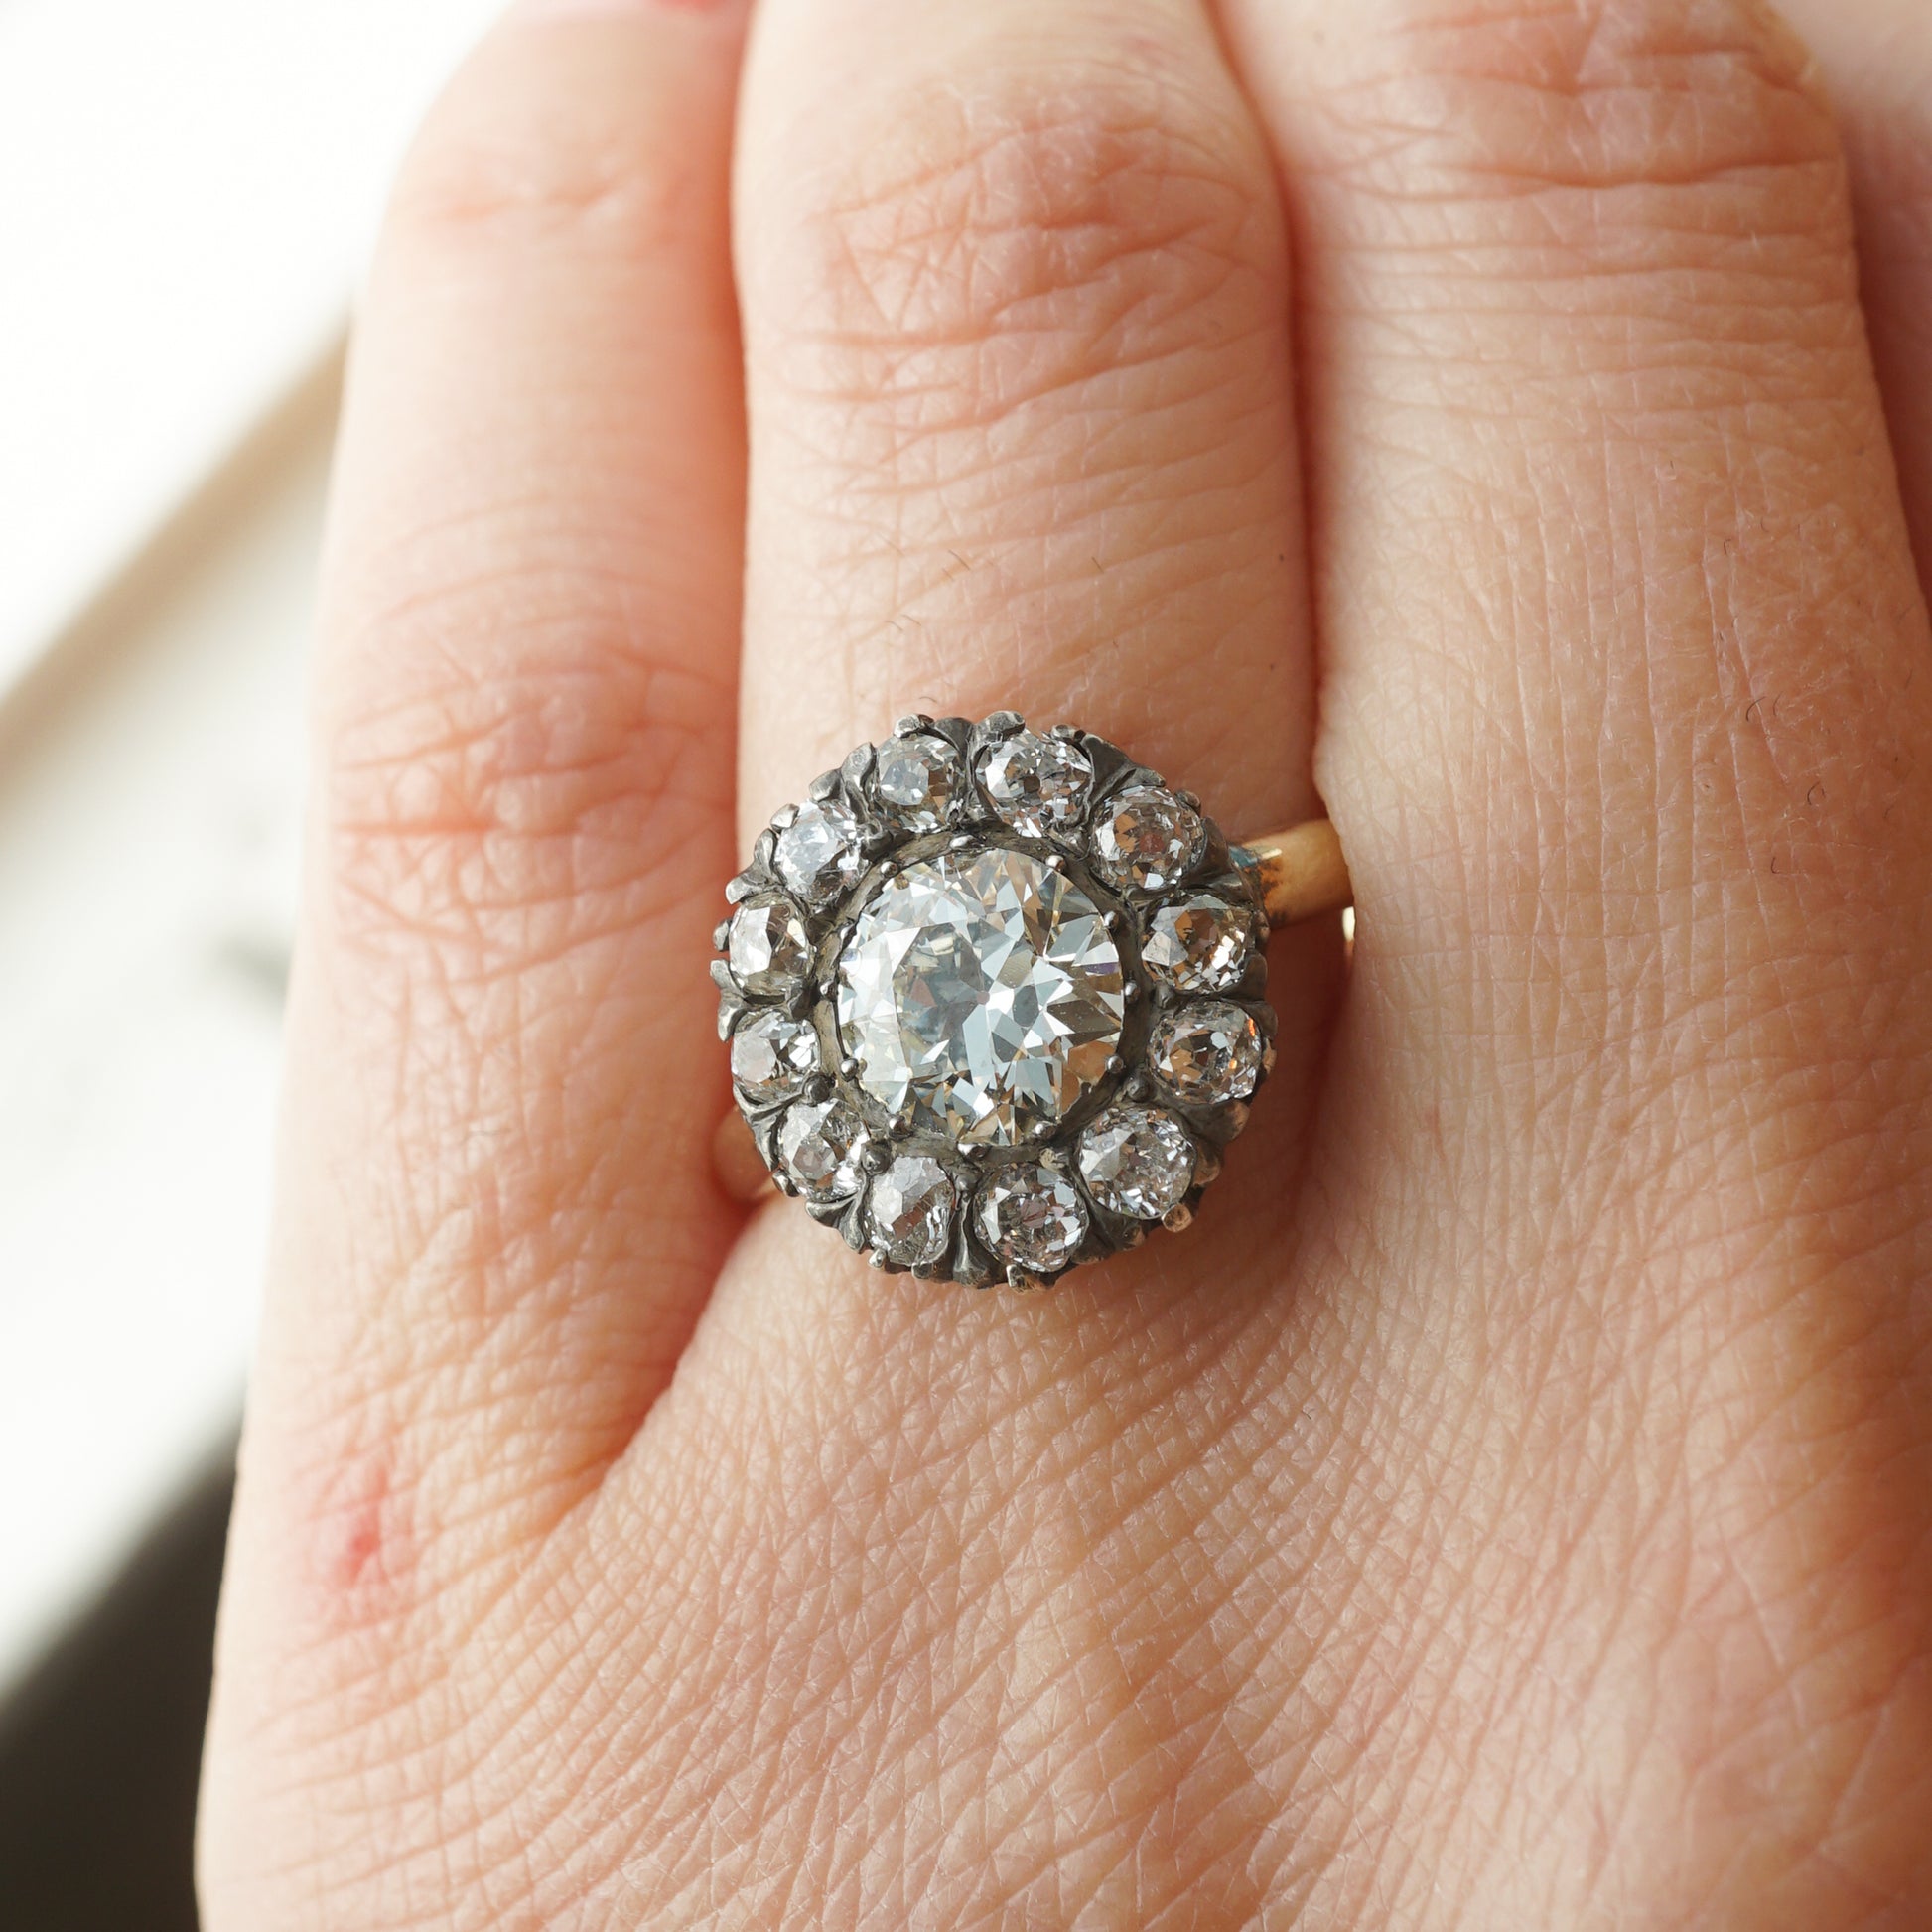 Antique Victorian Diamond Cluster Ring in Sterling Silver & 14k GoldComposition: PlatinumRing Size: 8Total Diamond Weight: 2.33 ctTotal Gram Weight: 3.0 g